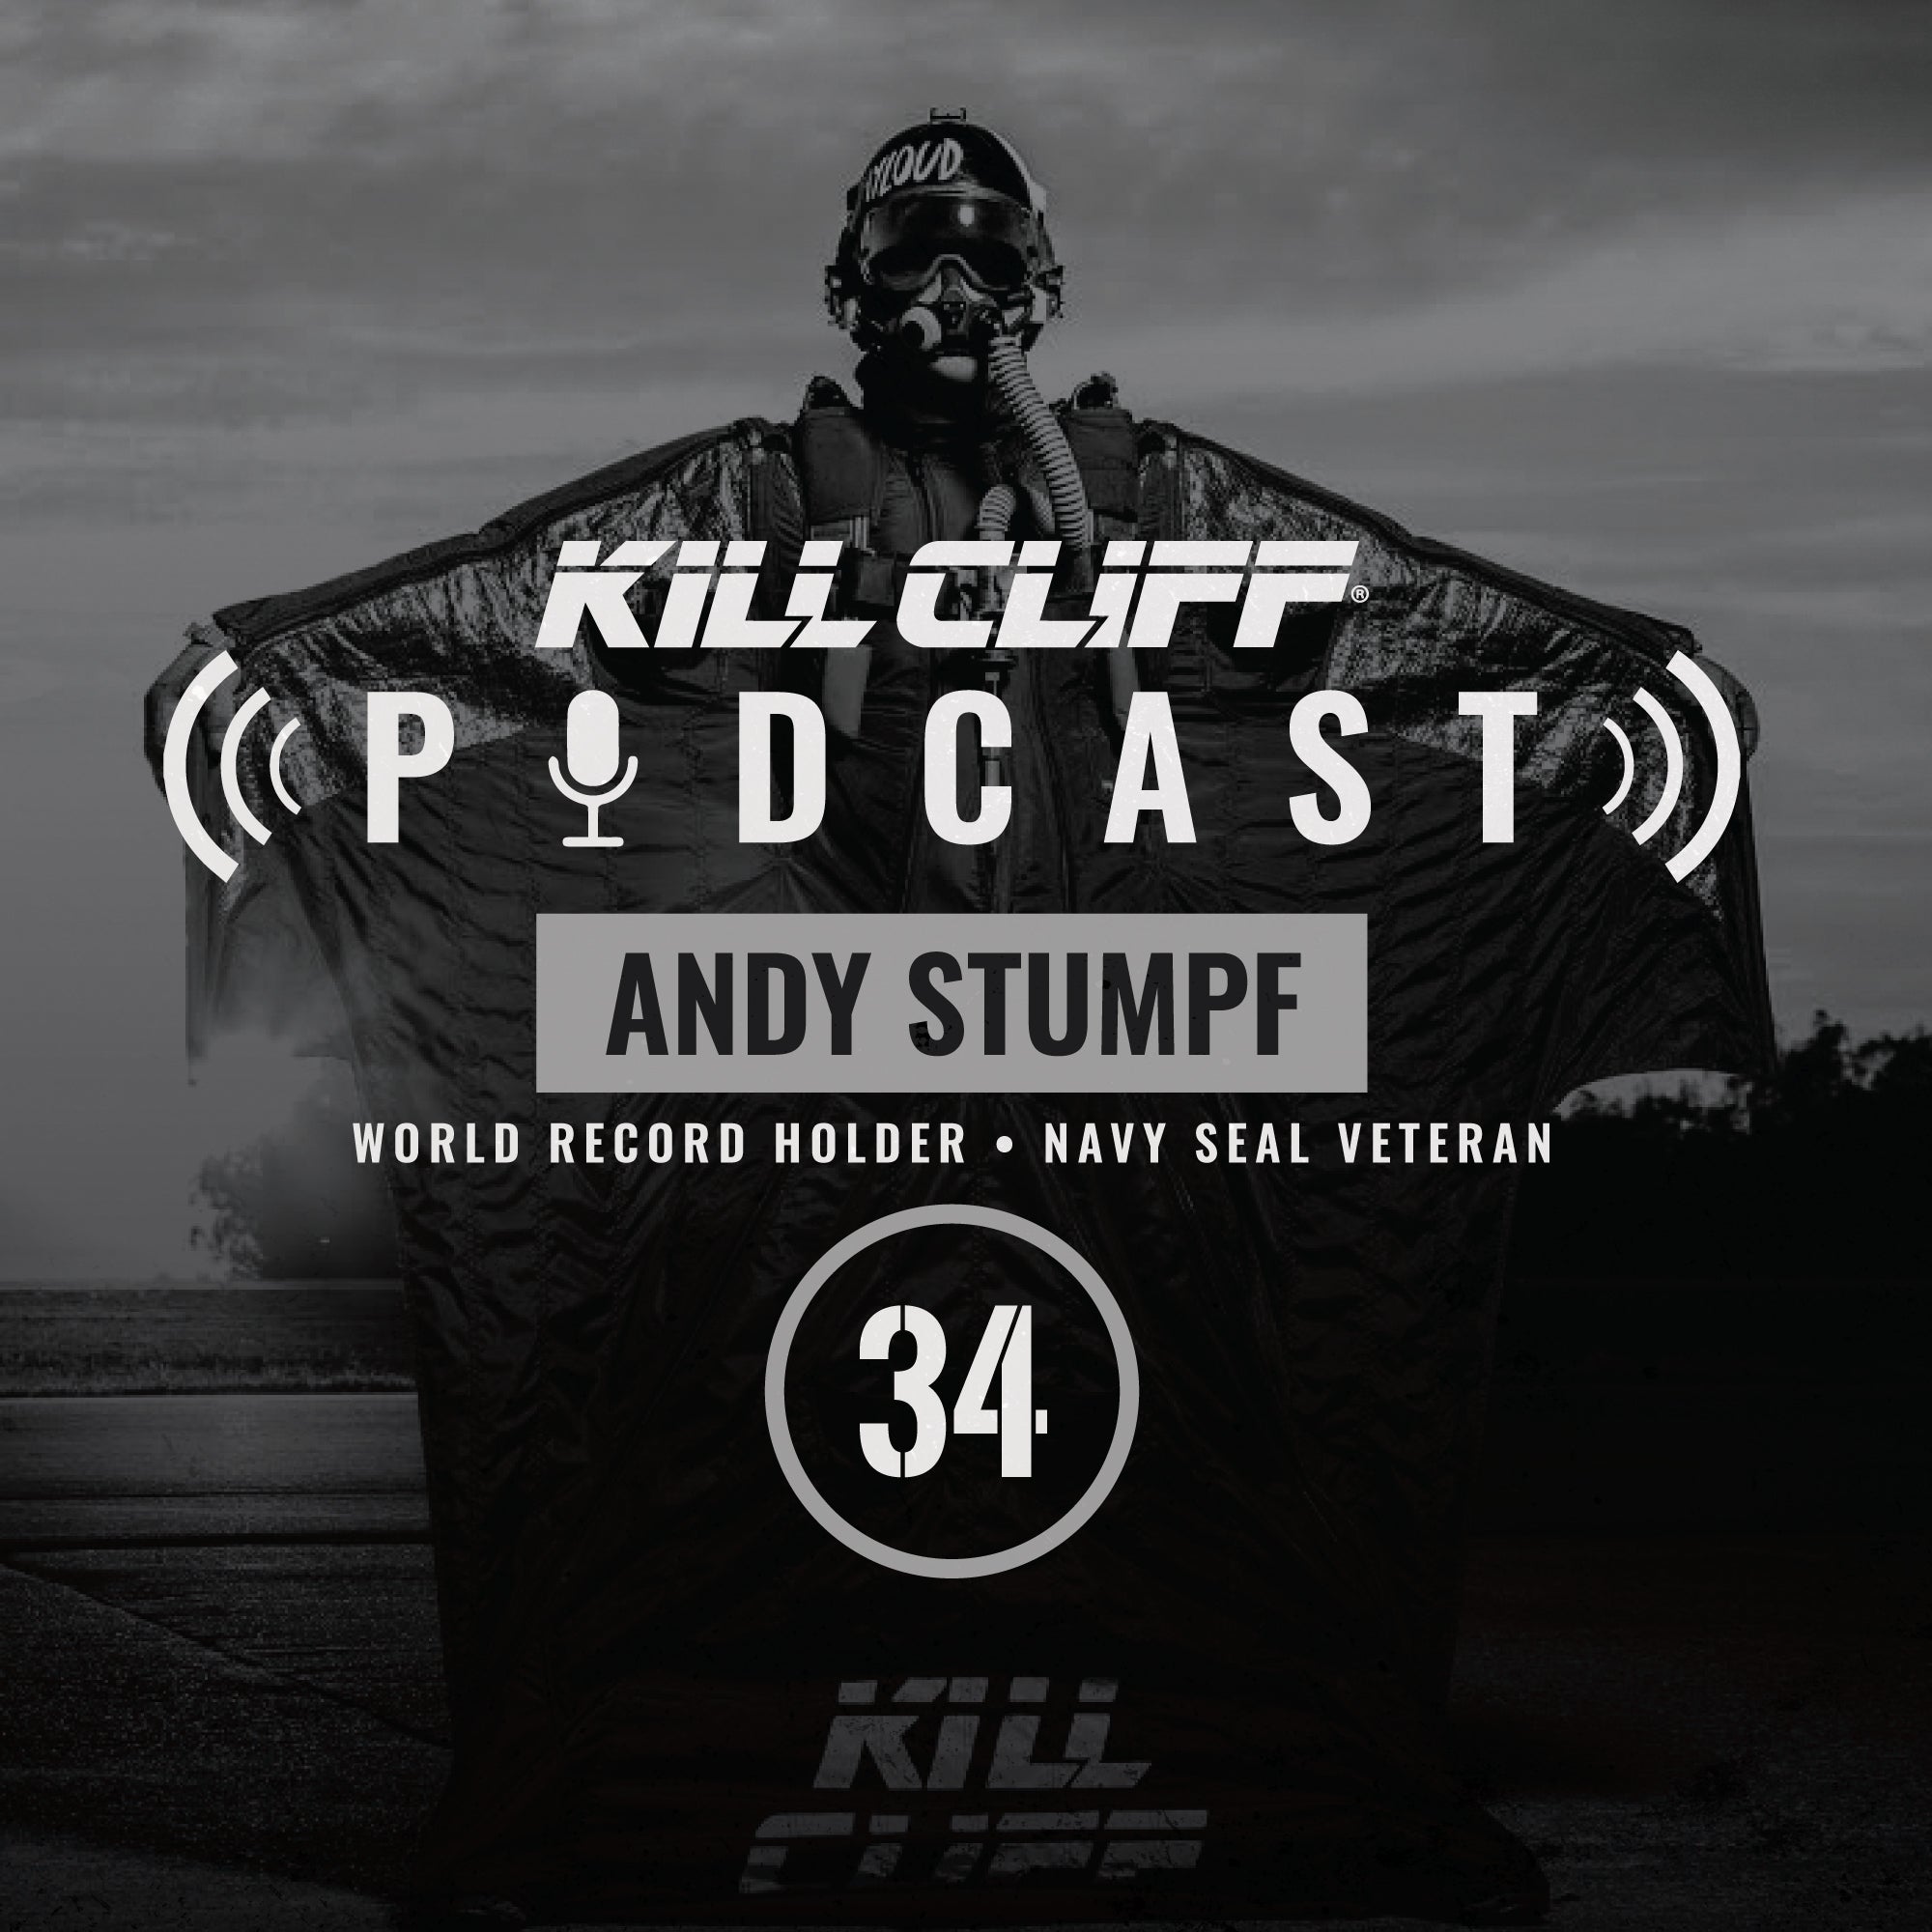 PODCAST Ep. 034 - Andy Stumpf - Kill Cliff